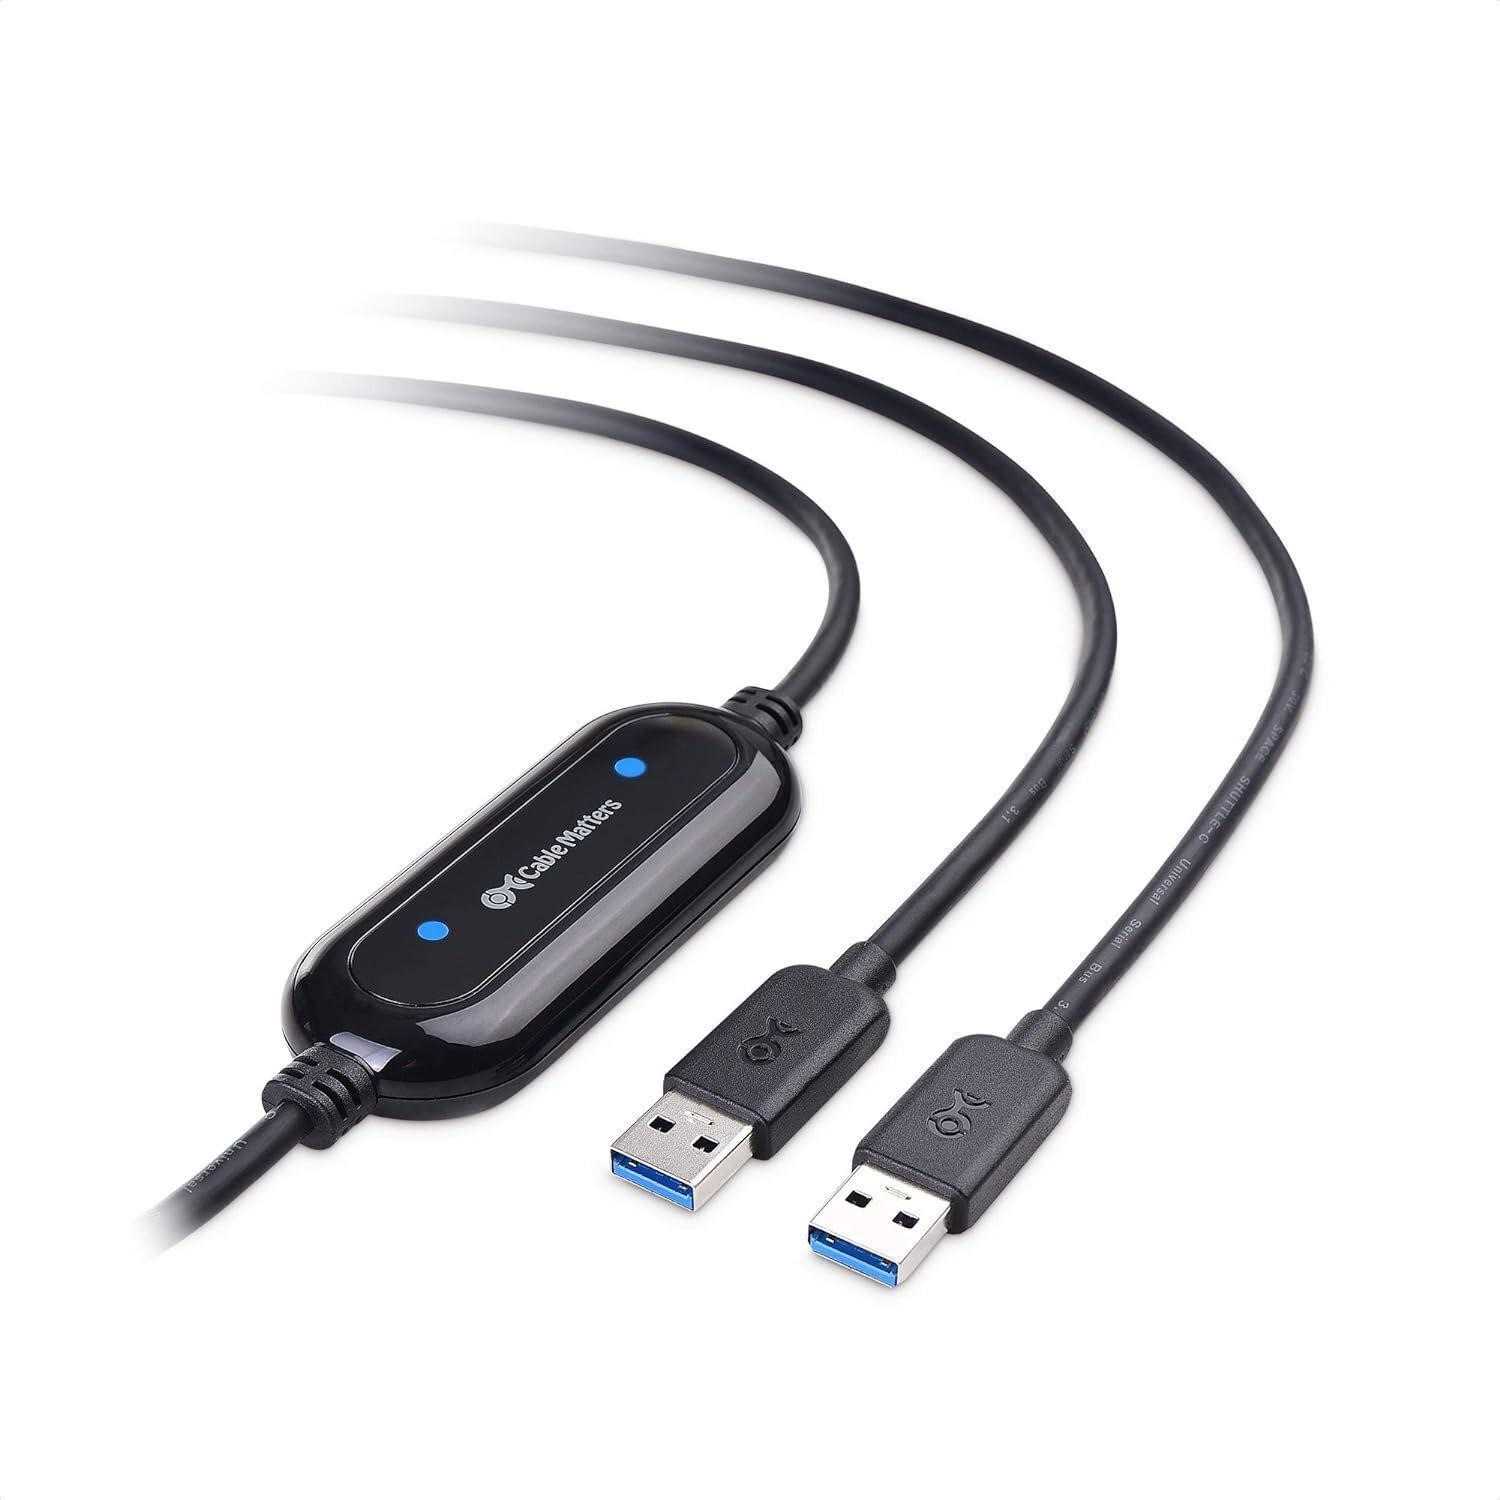 NEW $35 USB 3.0 Data Transfer Cable PC to PC